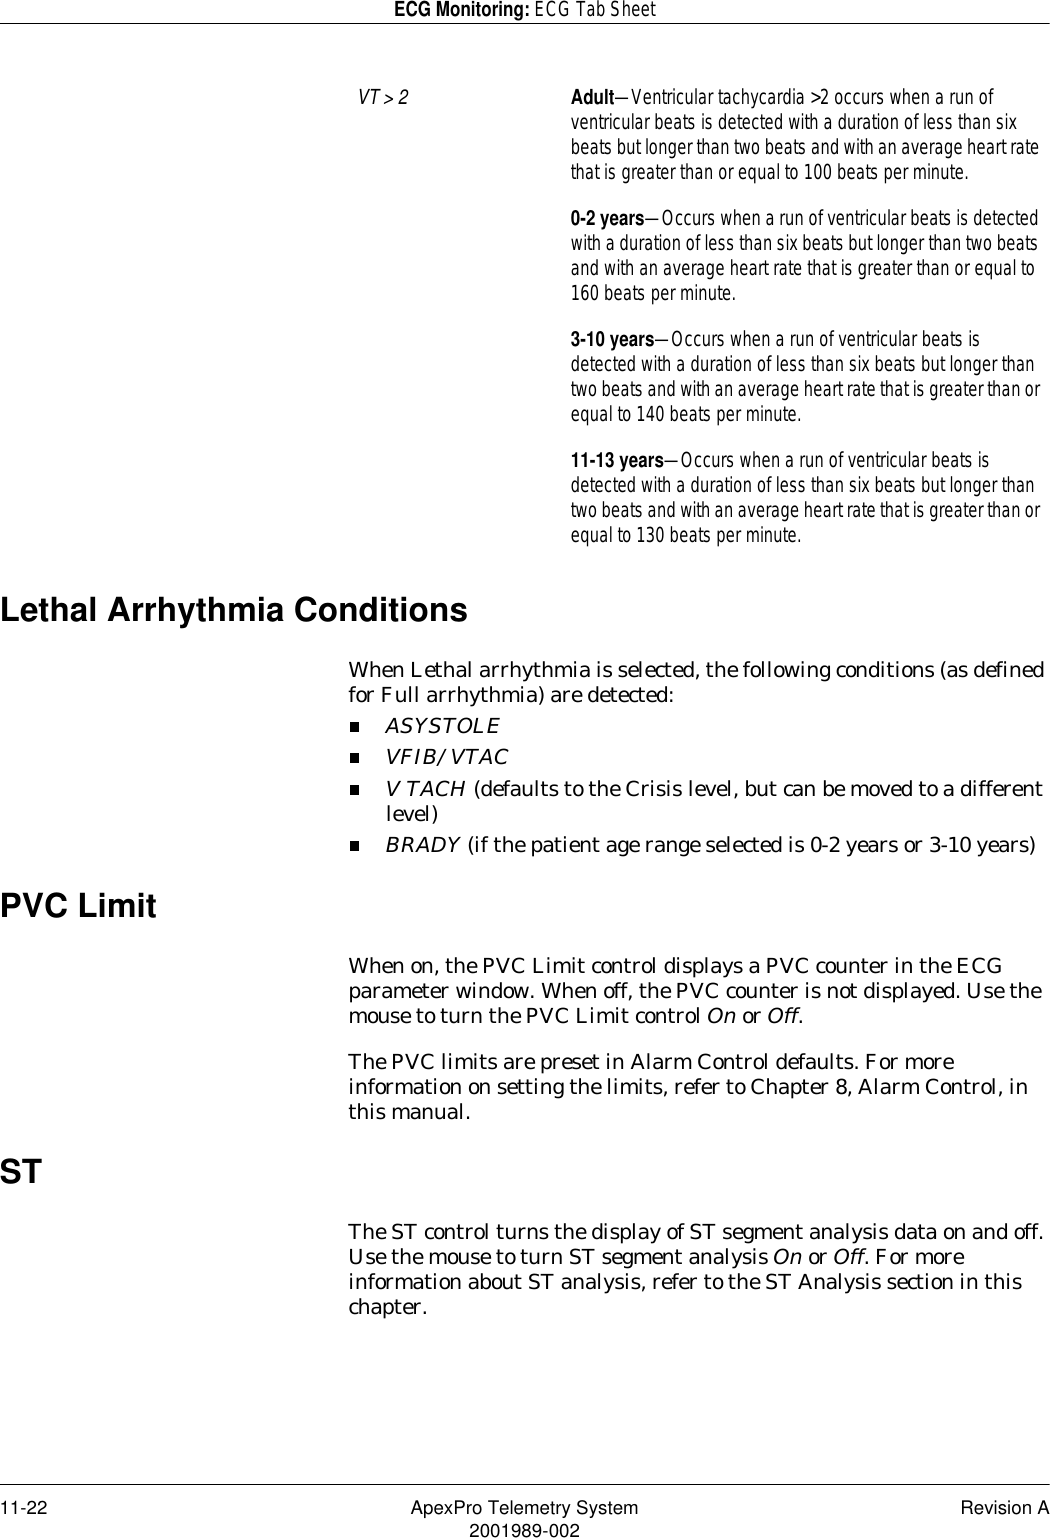 11-22 ApexPro Telemetry System Revision A2001989-002ECG Monitoring: ECG Tab SheetLethal Arrhythmia ConditionsWhen Lethal arrhythmia is selected, the following conditions (as defined for Full arrhythmia) are detected:ASYSTOLEVFIB/VTACV TACH (defaults to the Crisis level, but can be moved to a different level)BRADY (if the patient age range selected is 0-2 years or 3-10 years)PVC LimitWhen on, the PVC Limit control displays a PVC counter in the ECG parameter window. When off, the PVC counter is not displayed. Use the mouse to turn the PVC Limit control On or Off. The PVC limits are preset in Alarm Control defaults. For more information on setting the limits, refer to Chapter 8, Alarm Control, in this manual.STThe ST control turns the display of ST segment analysis data on and off. Use the mouse to turn ST segment analysis On or Off. For more information about ST analysis, refer to the ST Analysis section in this chapter.VT &gt; 2 Adult—Ventricular tachycardia &gt;2 occurs when a run of ventricular beats is detected with a duration of less than six beats but longer than two beats and with an average heart rate that is greater than or equal to 100 beats per minute.0-2 years—Occurs when a run of ventricular beats is detected with a duration of less than six beats but longer than two beats and with an average heart rate that is greater than or equal to 160 beats per minute.3-10 years—Occurs when a run of ventricular beats is detected with a duration of less than six beats but longer than two beats and with an average heart rate that is greater than or equal to 140 beats per minute.11-13 years—Occurs when a run of ventricular beats is detected with a duration of less than six beats but longer than two beats and with an average heart rate that is greater than or equal to 130 beats per minute.